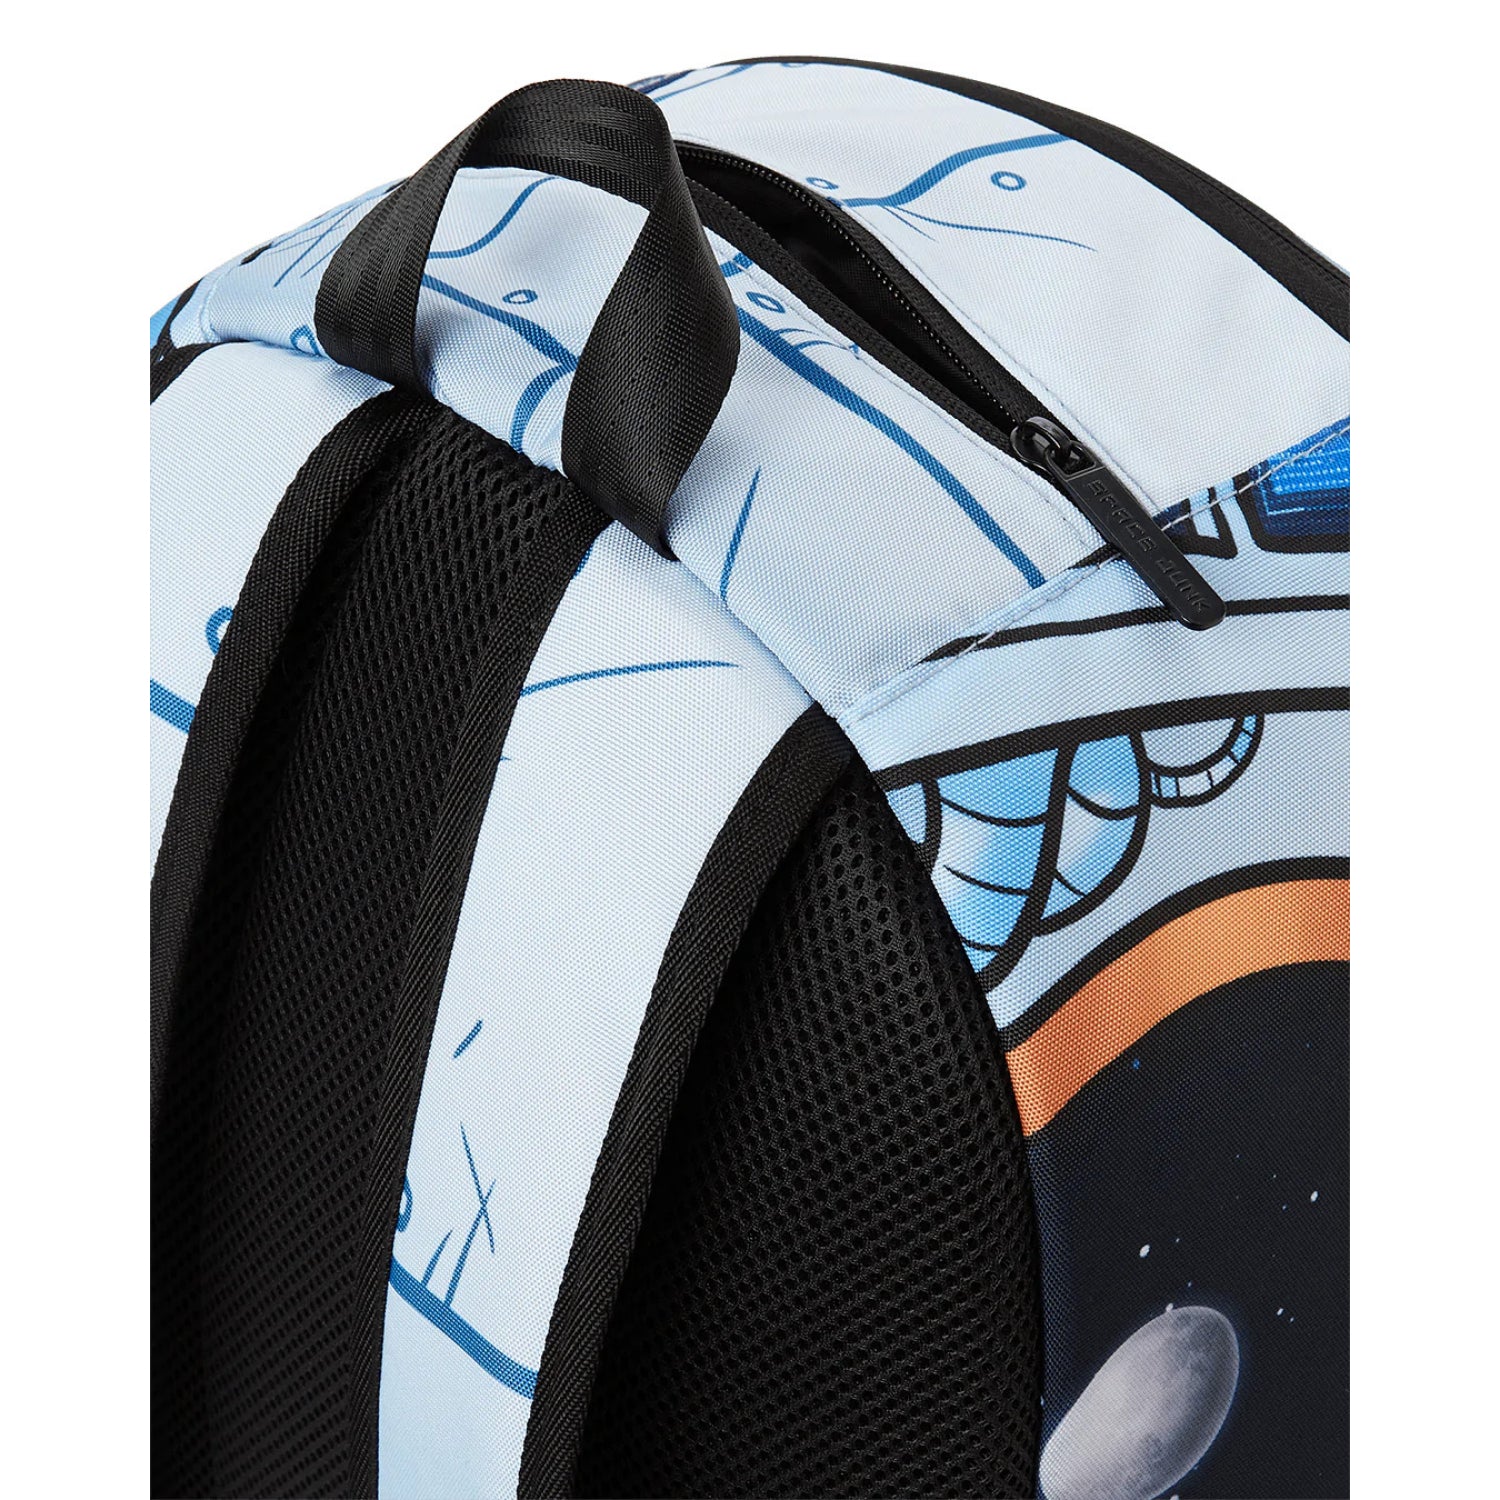 SPACE JUNK Iconic Full Size Backpack – S&D Kids